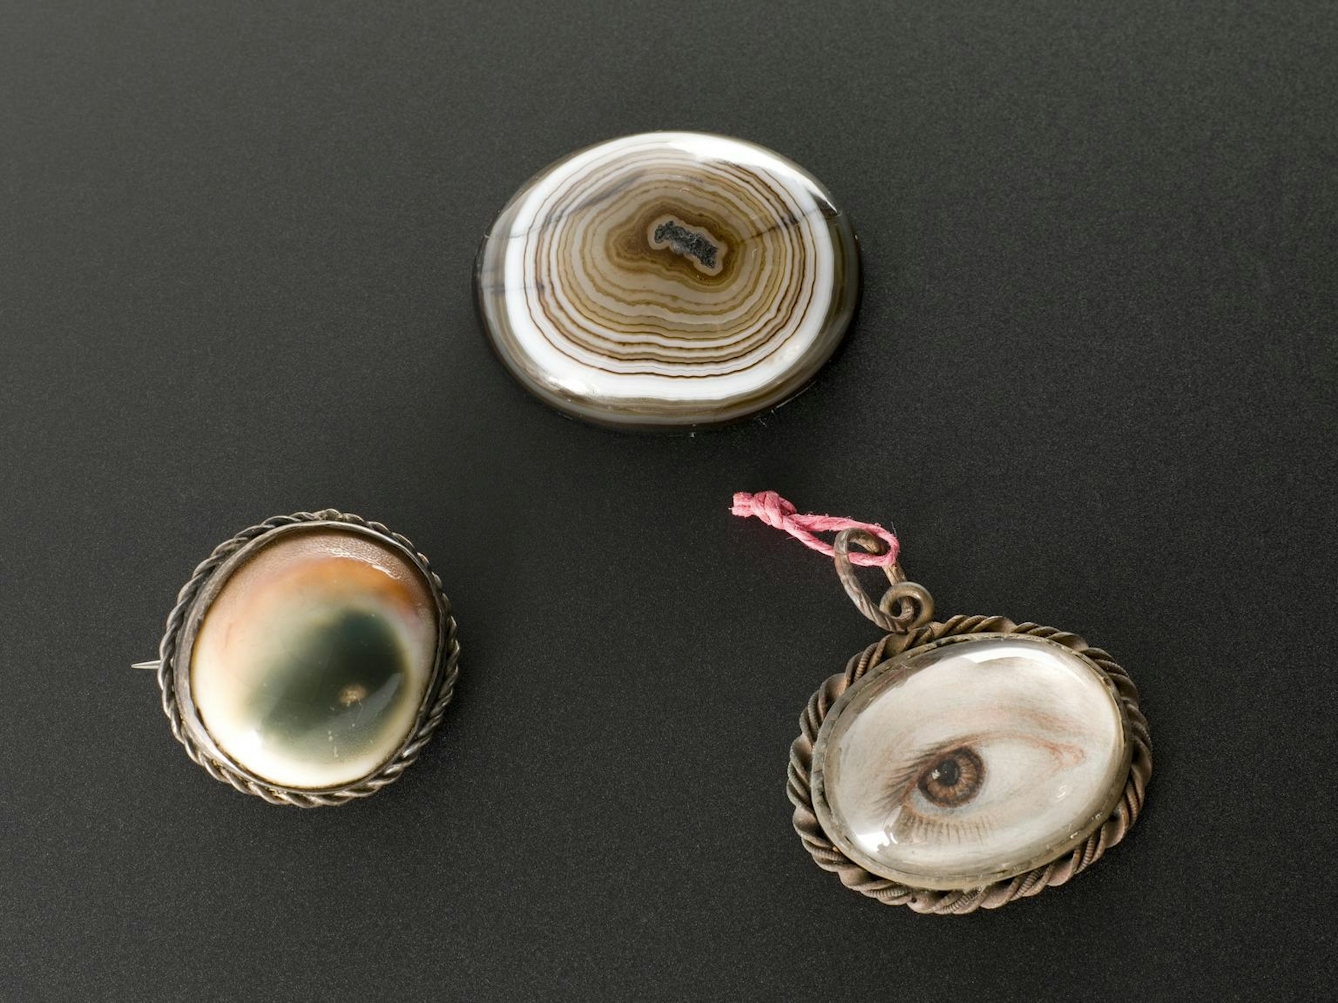 Photograph of 3 amulets placed on a textured grey background. All are amulets against the evil eye. One depicts a drawing of a human eye, the other 2 display more abstract patterns of concentric rings and colour patches.